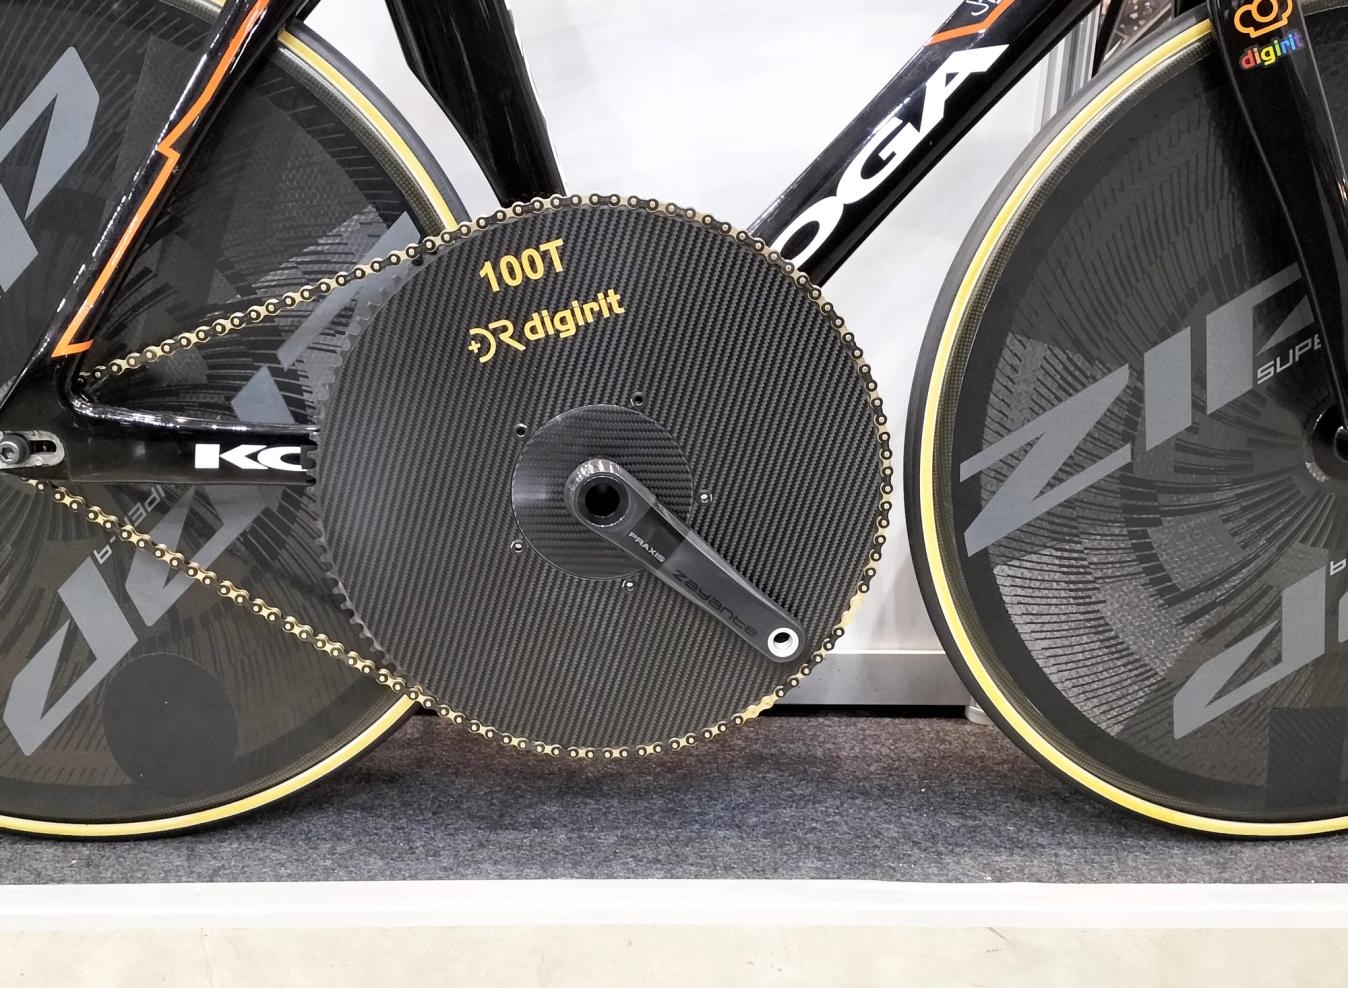 Digirit has taken chainring sizes to the next level with this 100t option